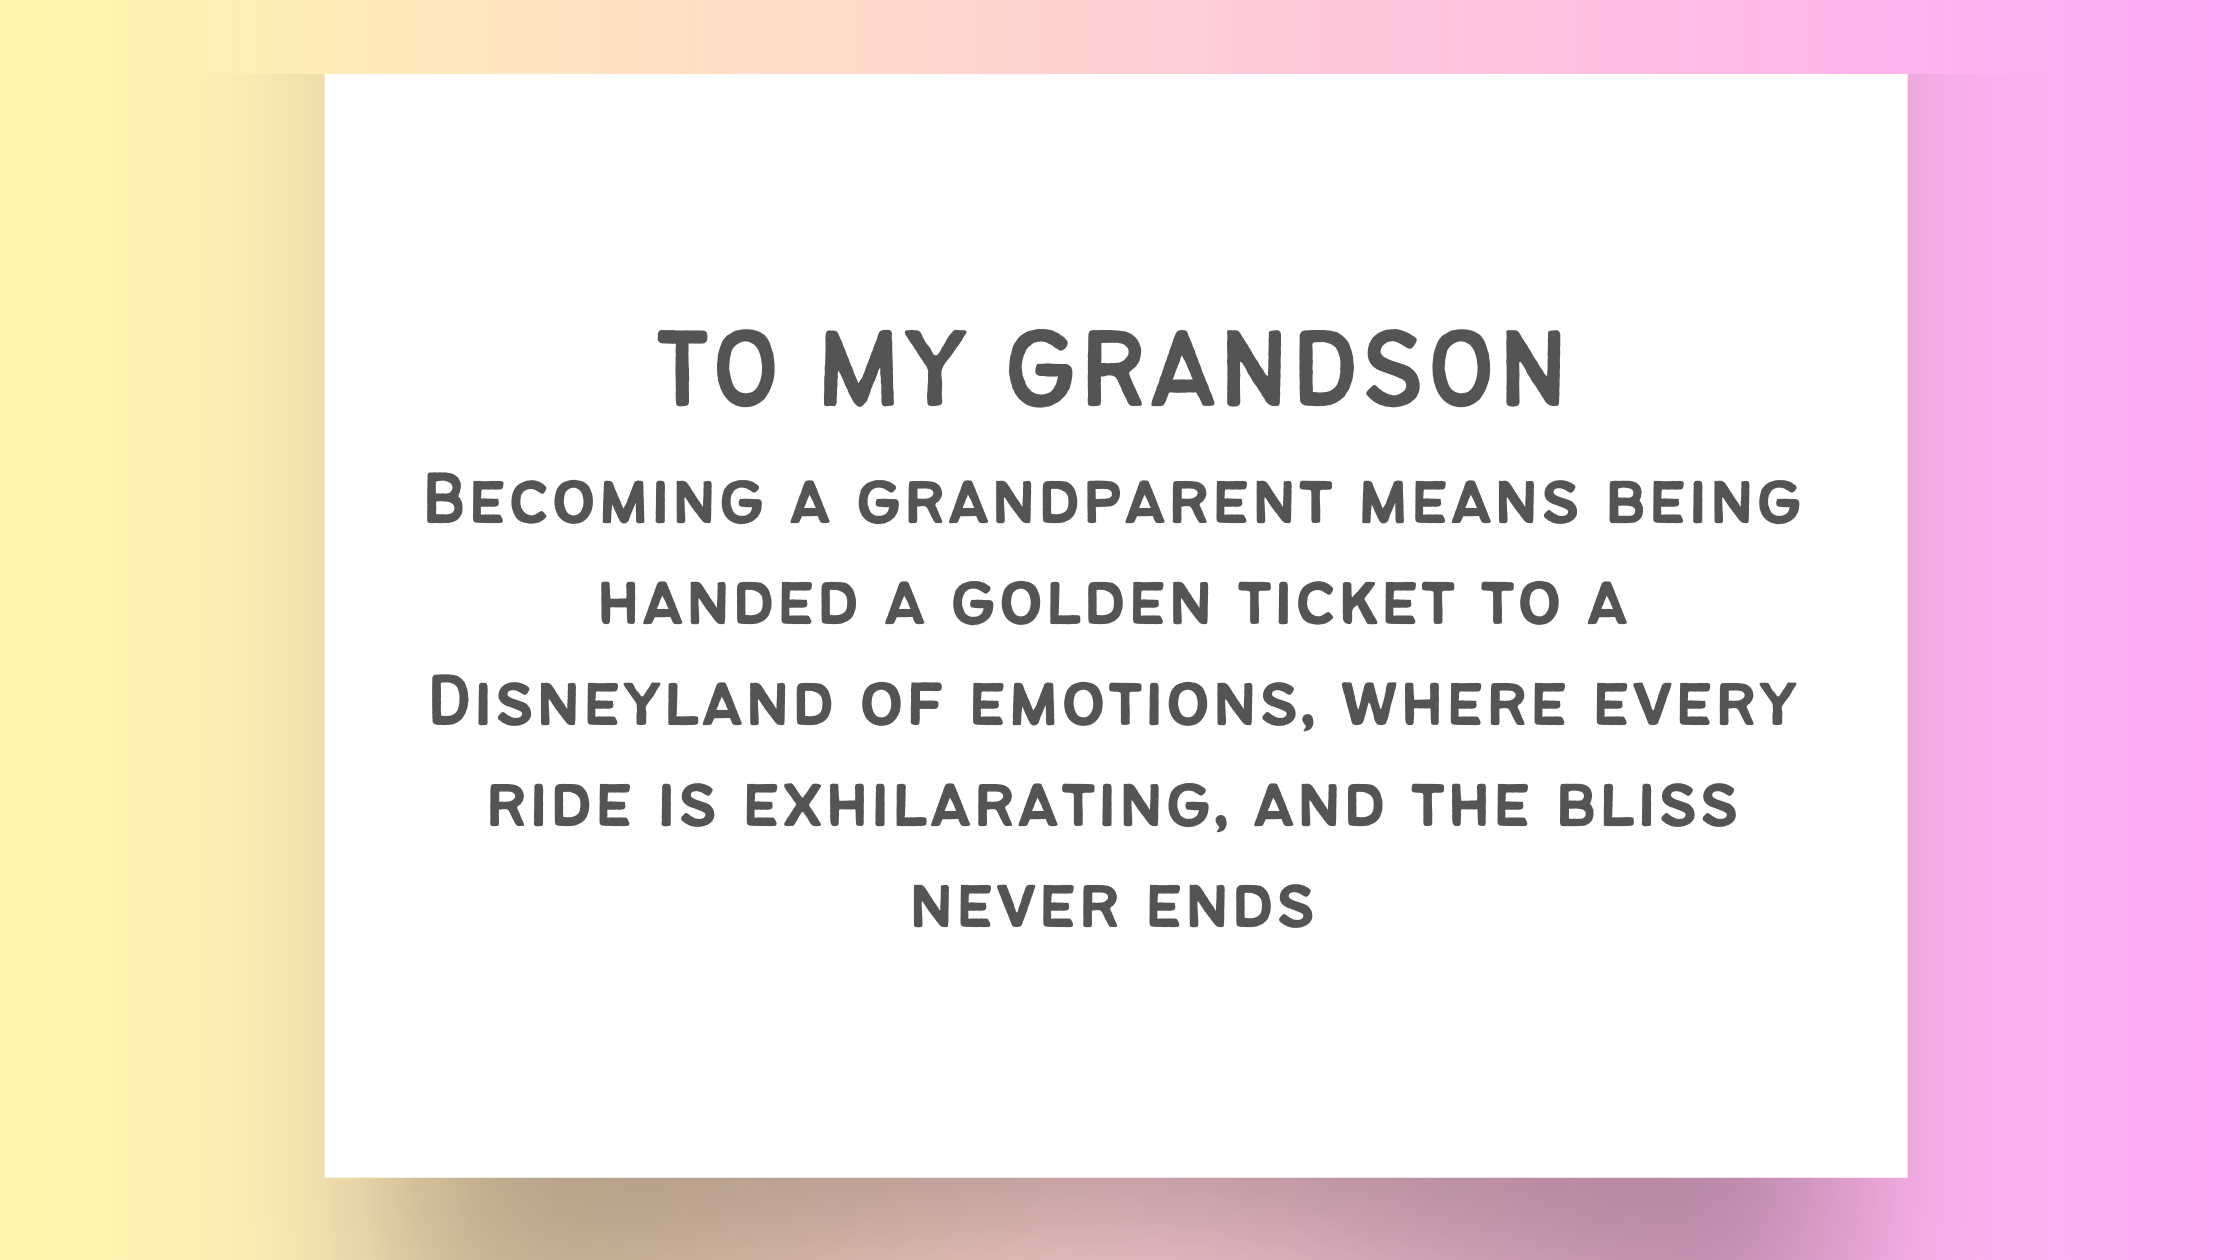 10 Heartwarming Messages: Celebrating the Joy of Being Blessed with a Grandson